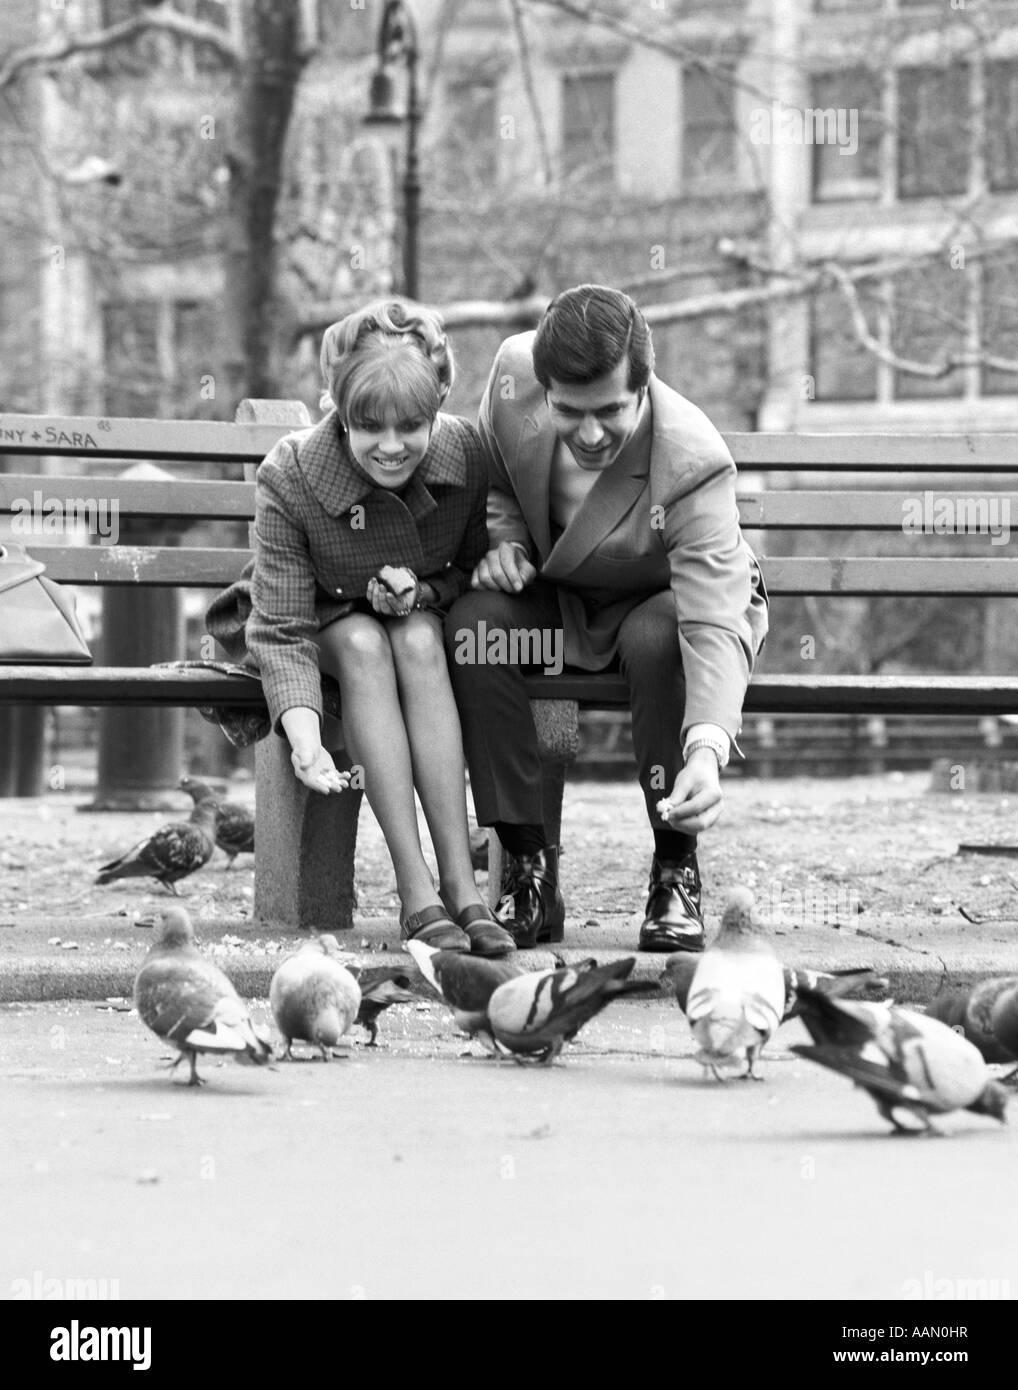 1970s COUPLE ON PARK BENCH LEANING DOWN TO FEED PIGEONS Stock Photo